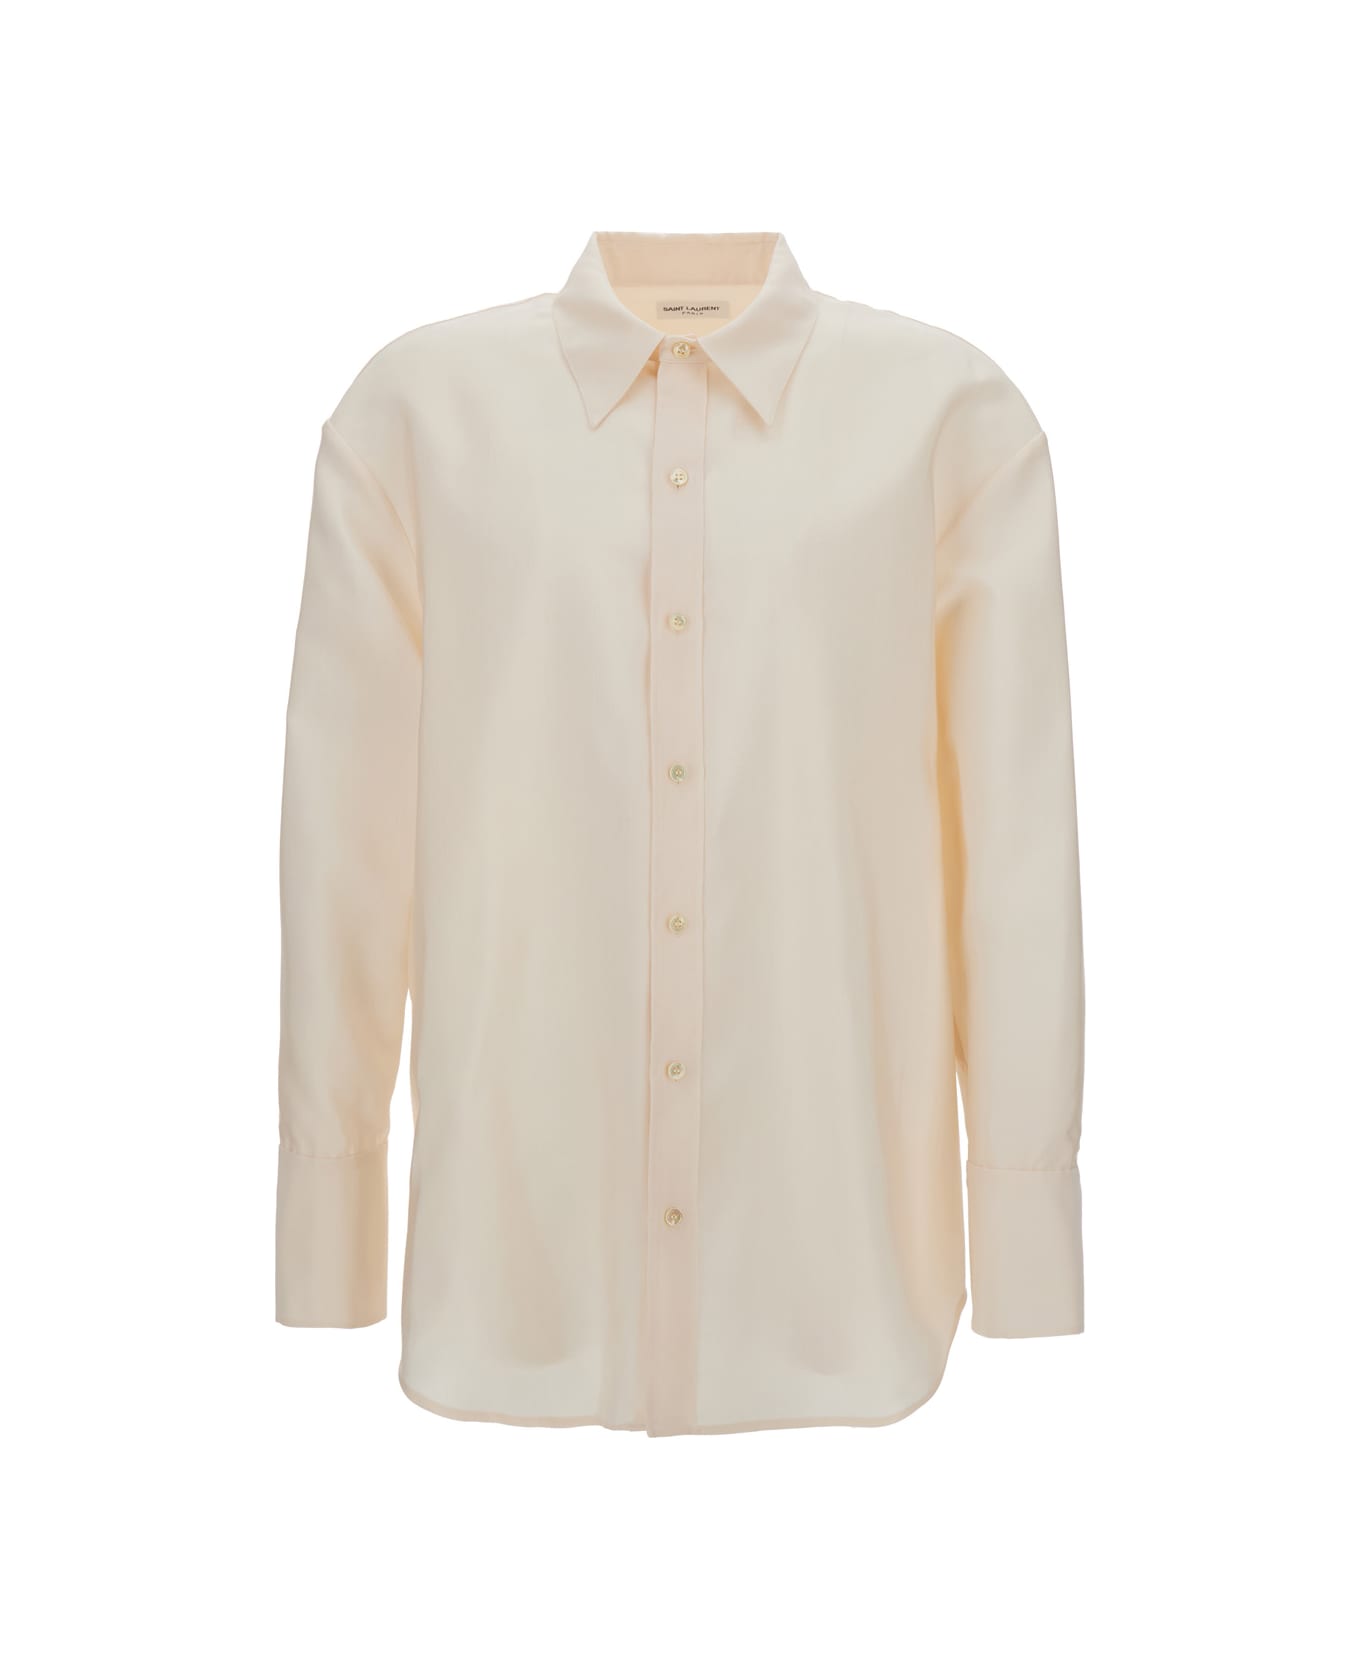 Saint Laurent Ivory White Buttoned Oversized Shirt In Technical Fabric Man - White